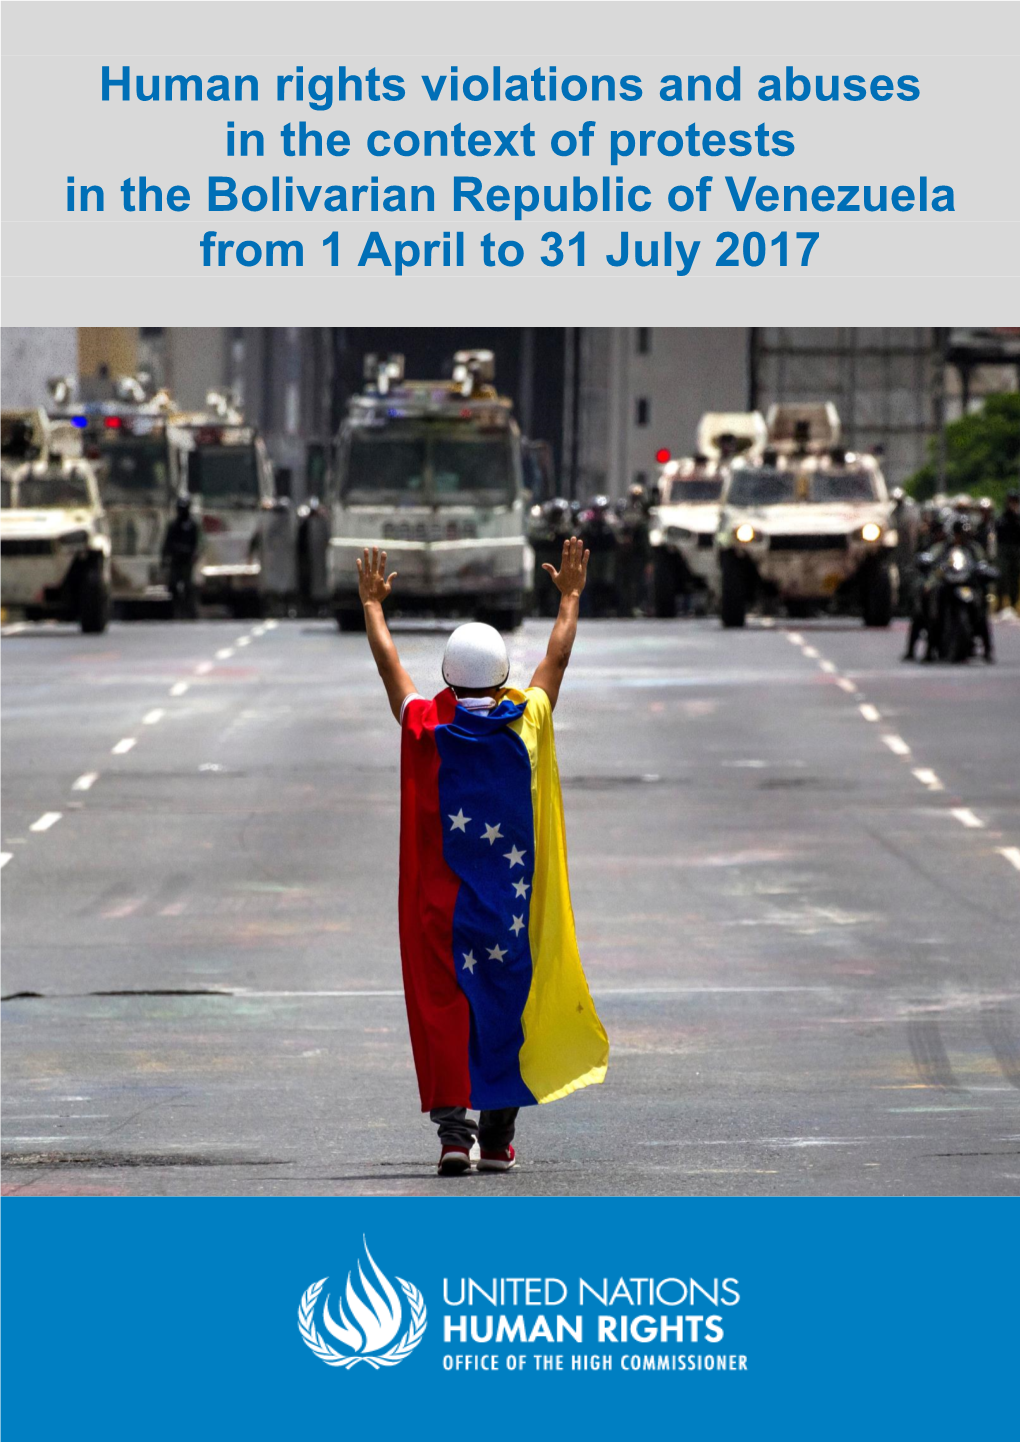 Human Rights Violations and Abuses in the Context of Protests in the Bolivarian Republic of Venezuela from 1 April to 31 July 2017